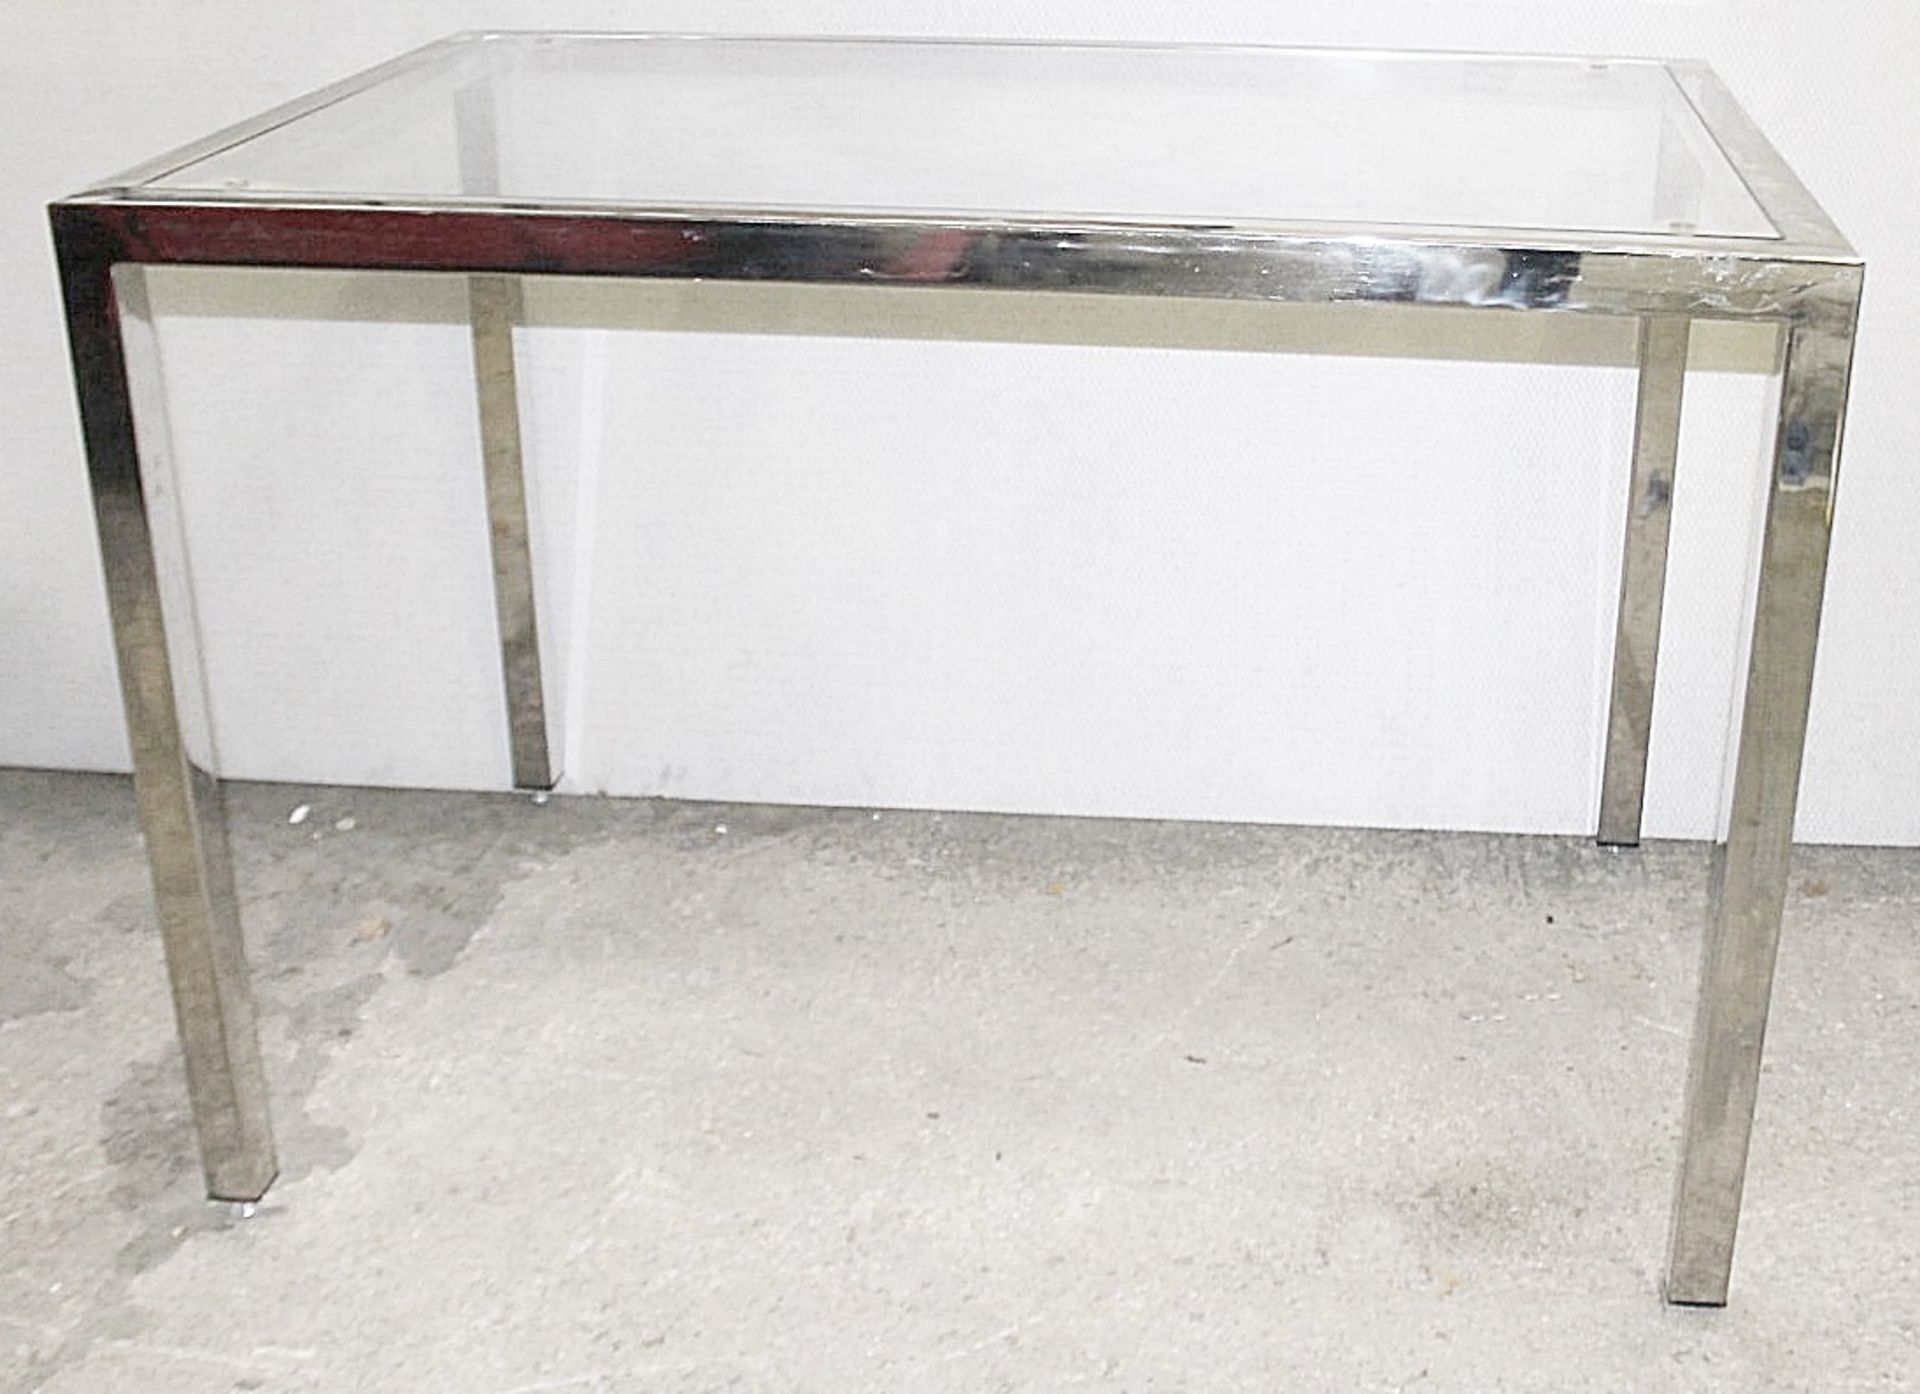 1 x Large Display Table In Glass And Chrome - Dimensions: H91 x W135 x D90cm - Ex-Showroom Piece - - Image 4 of 6